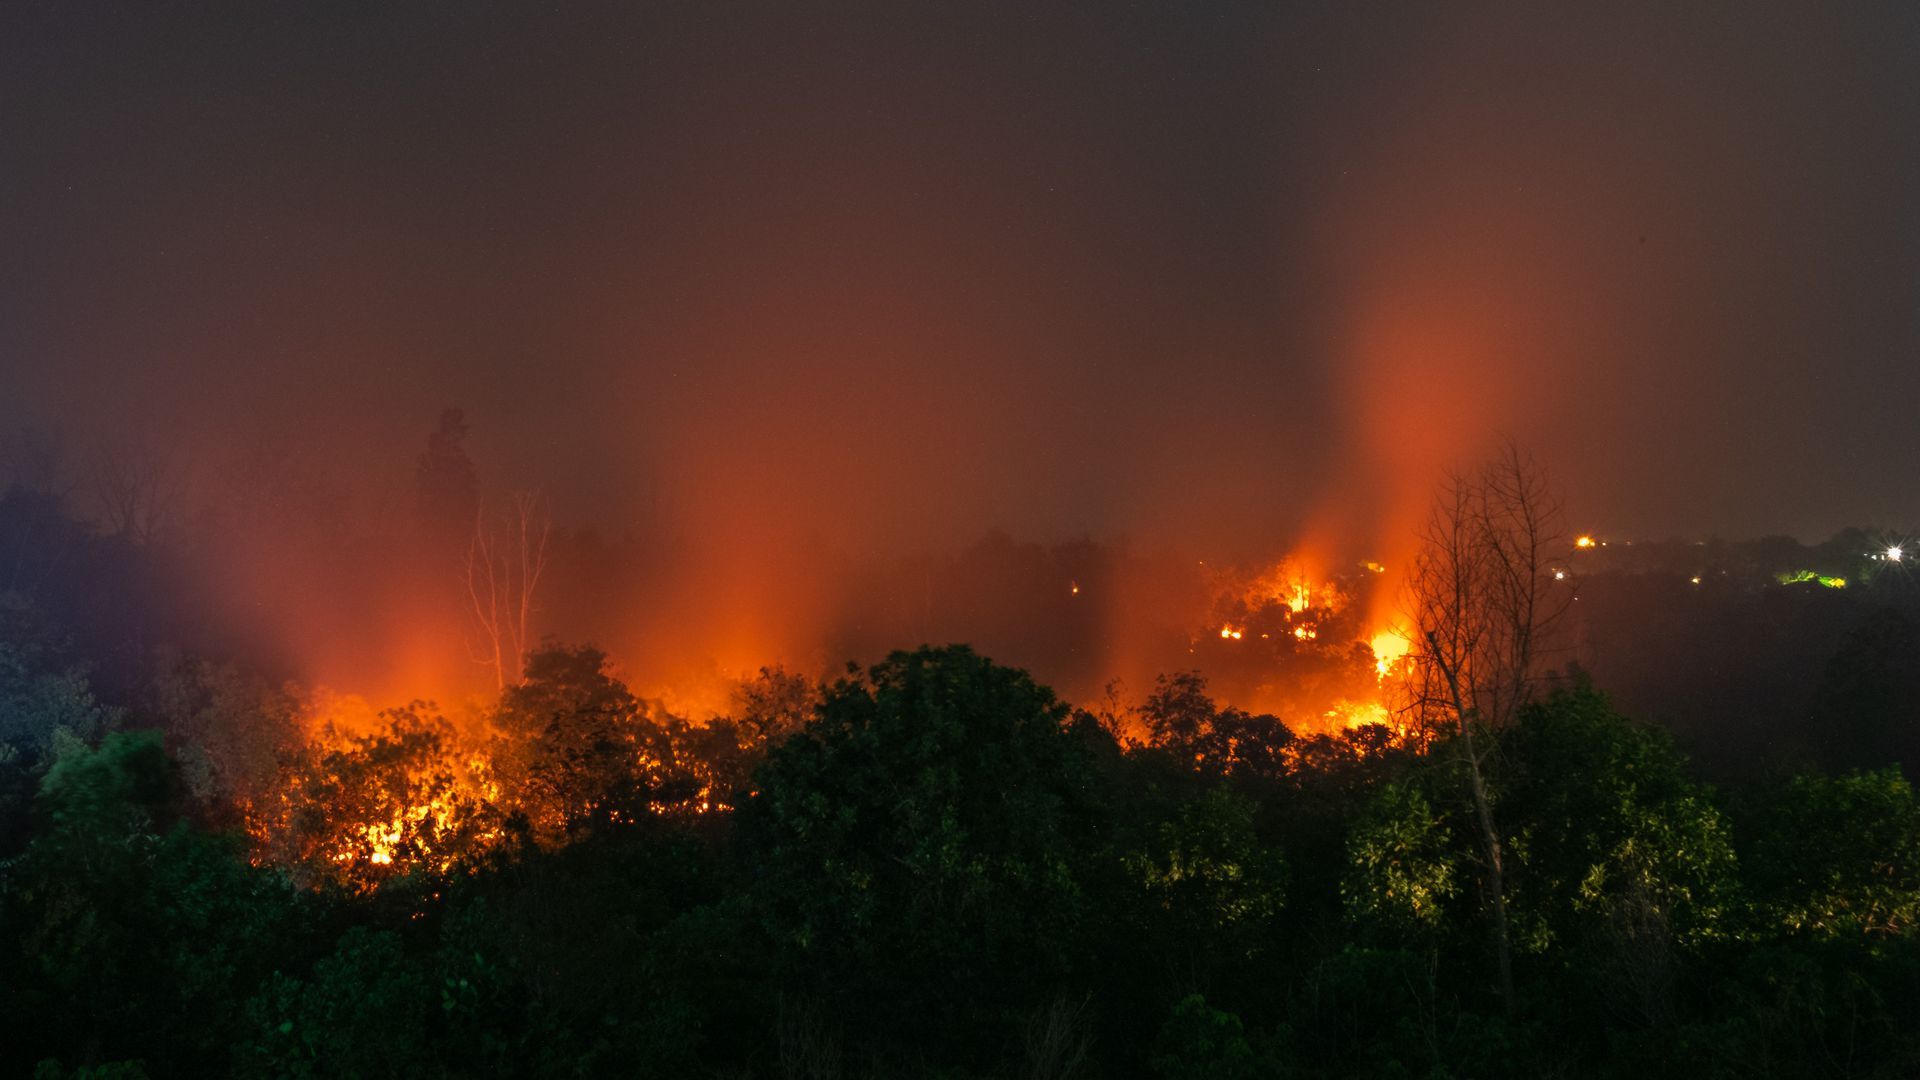 Forest fire in Riau Province, Indonesia. Indonesia's fires have been an annual problem for decades, much of it human-made for more palm oil plantations. 